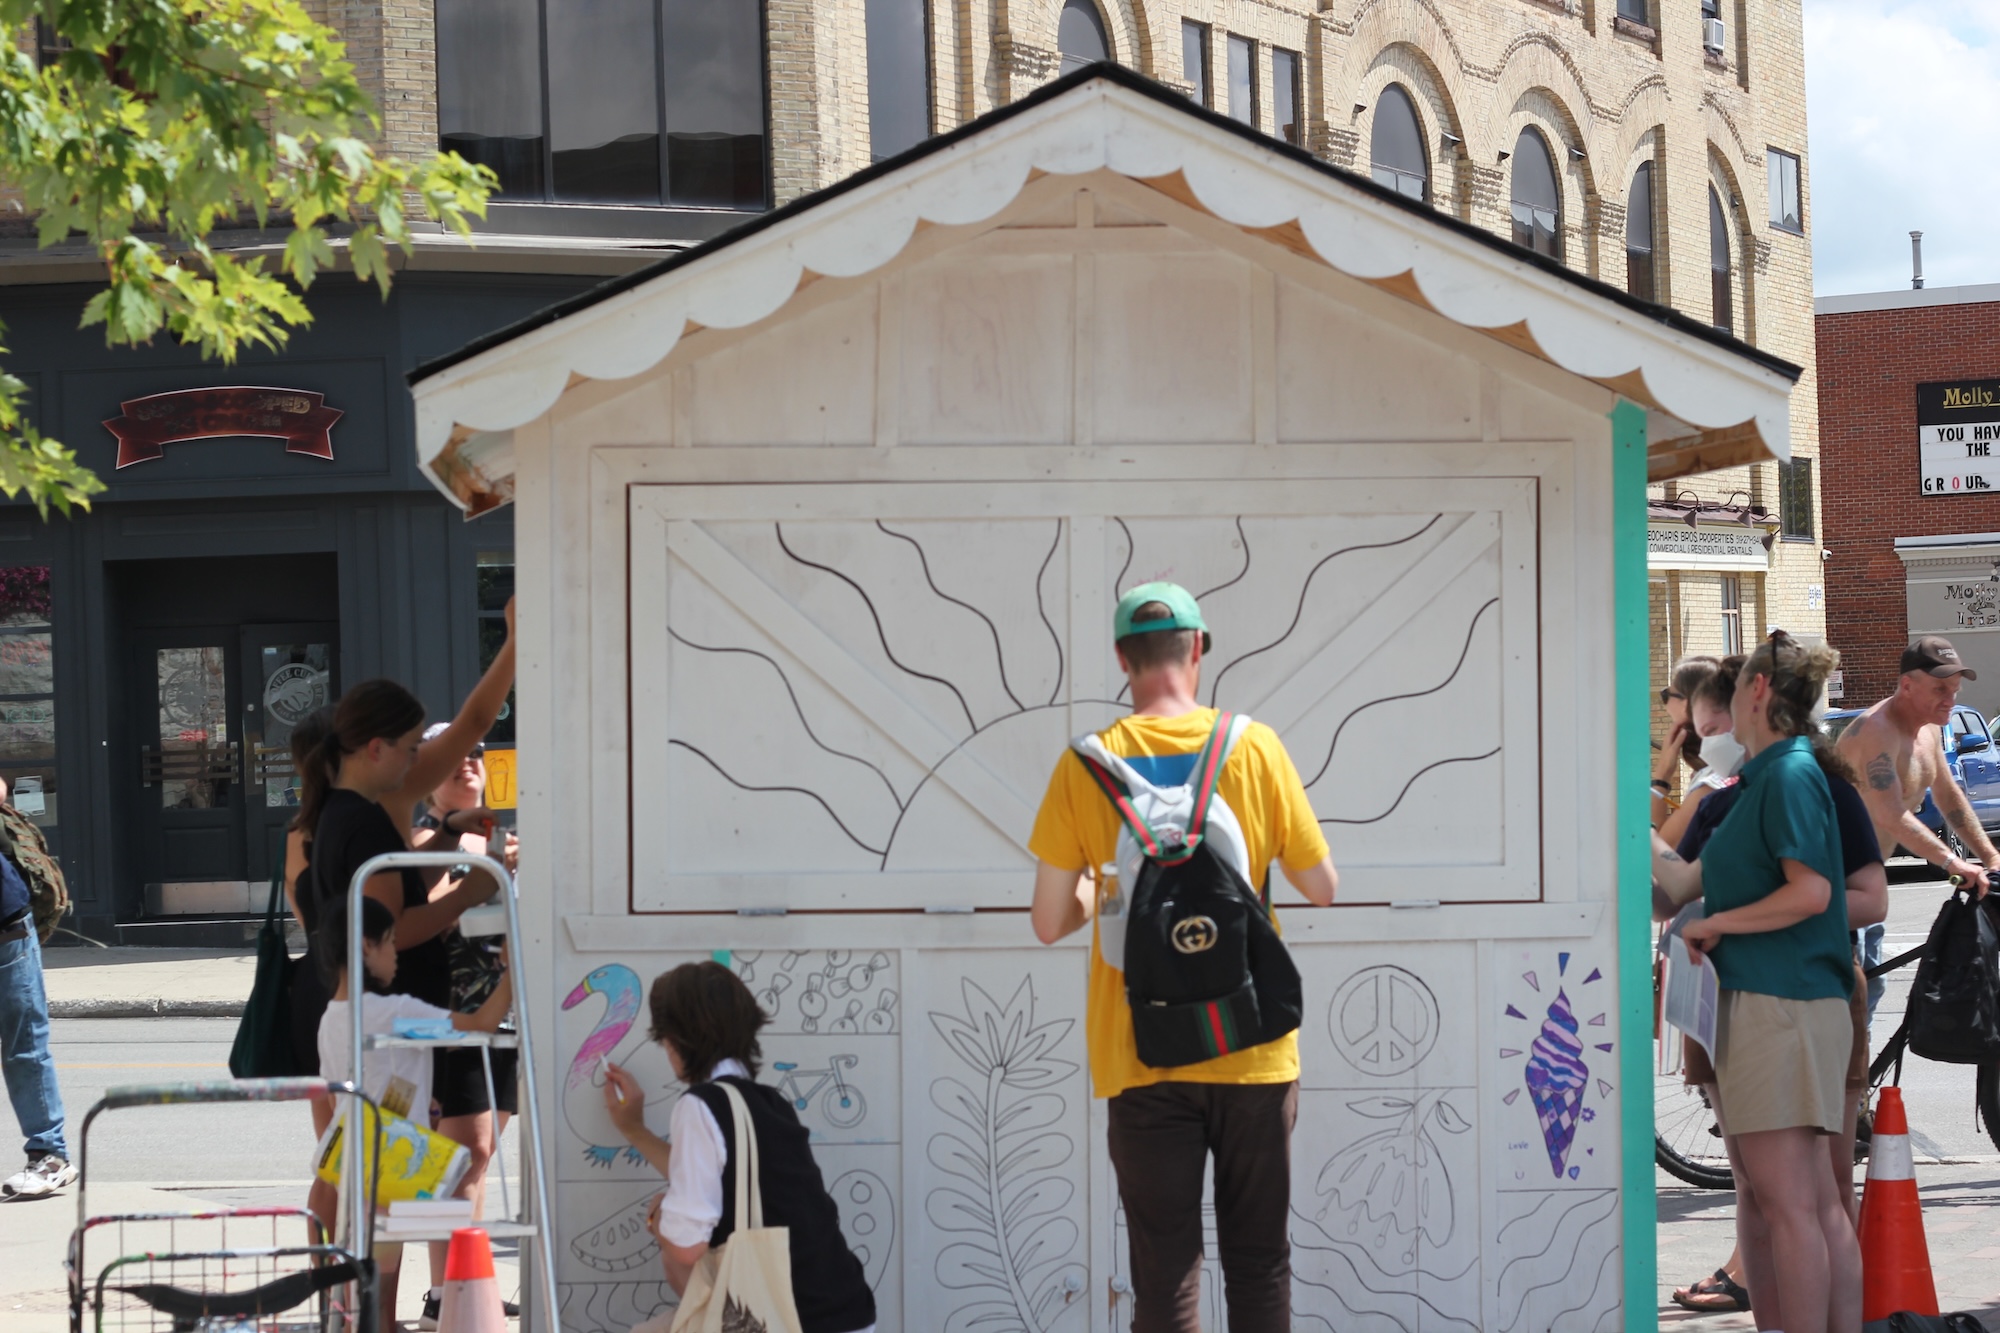 Families putting artwork on a wooden shed in Downtown Stratford as part of a community engagement by STEPS Public Art